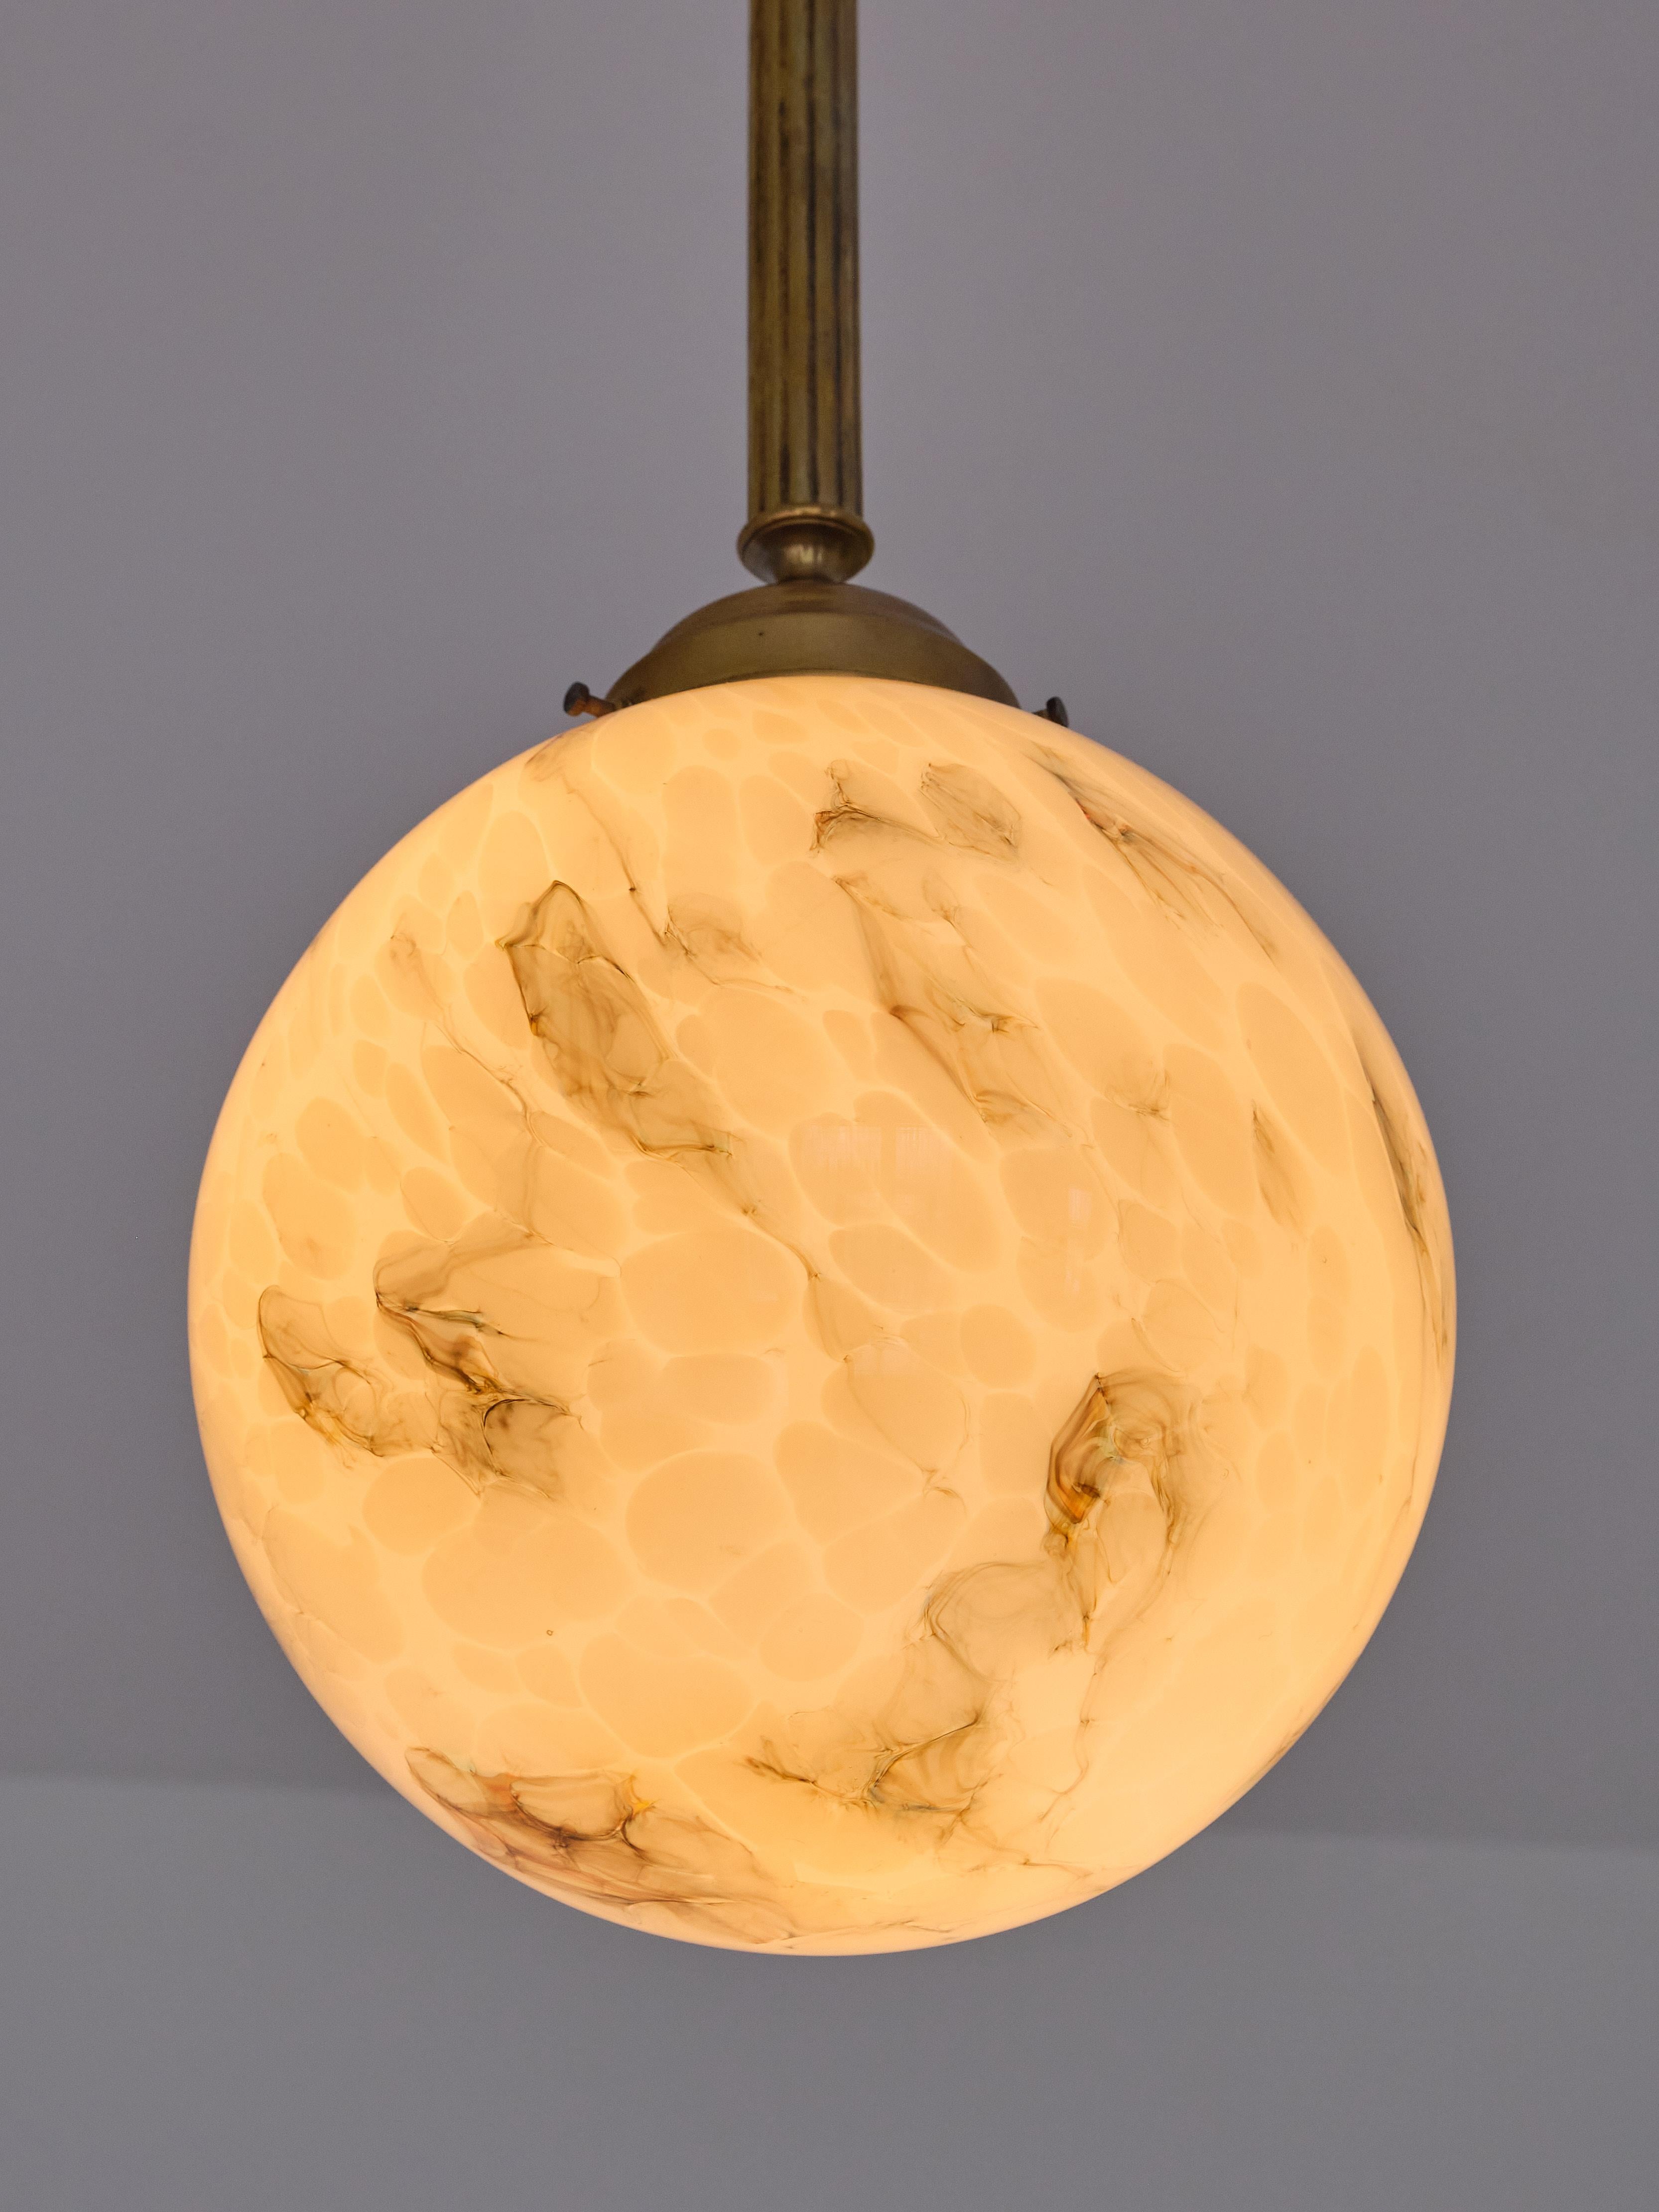 Pair of Art Deco Pendants in Brass and Marbled Glass, De La Mar Theatre, 1940s For Sale 5